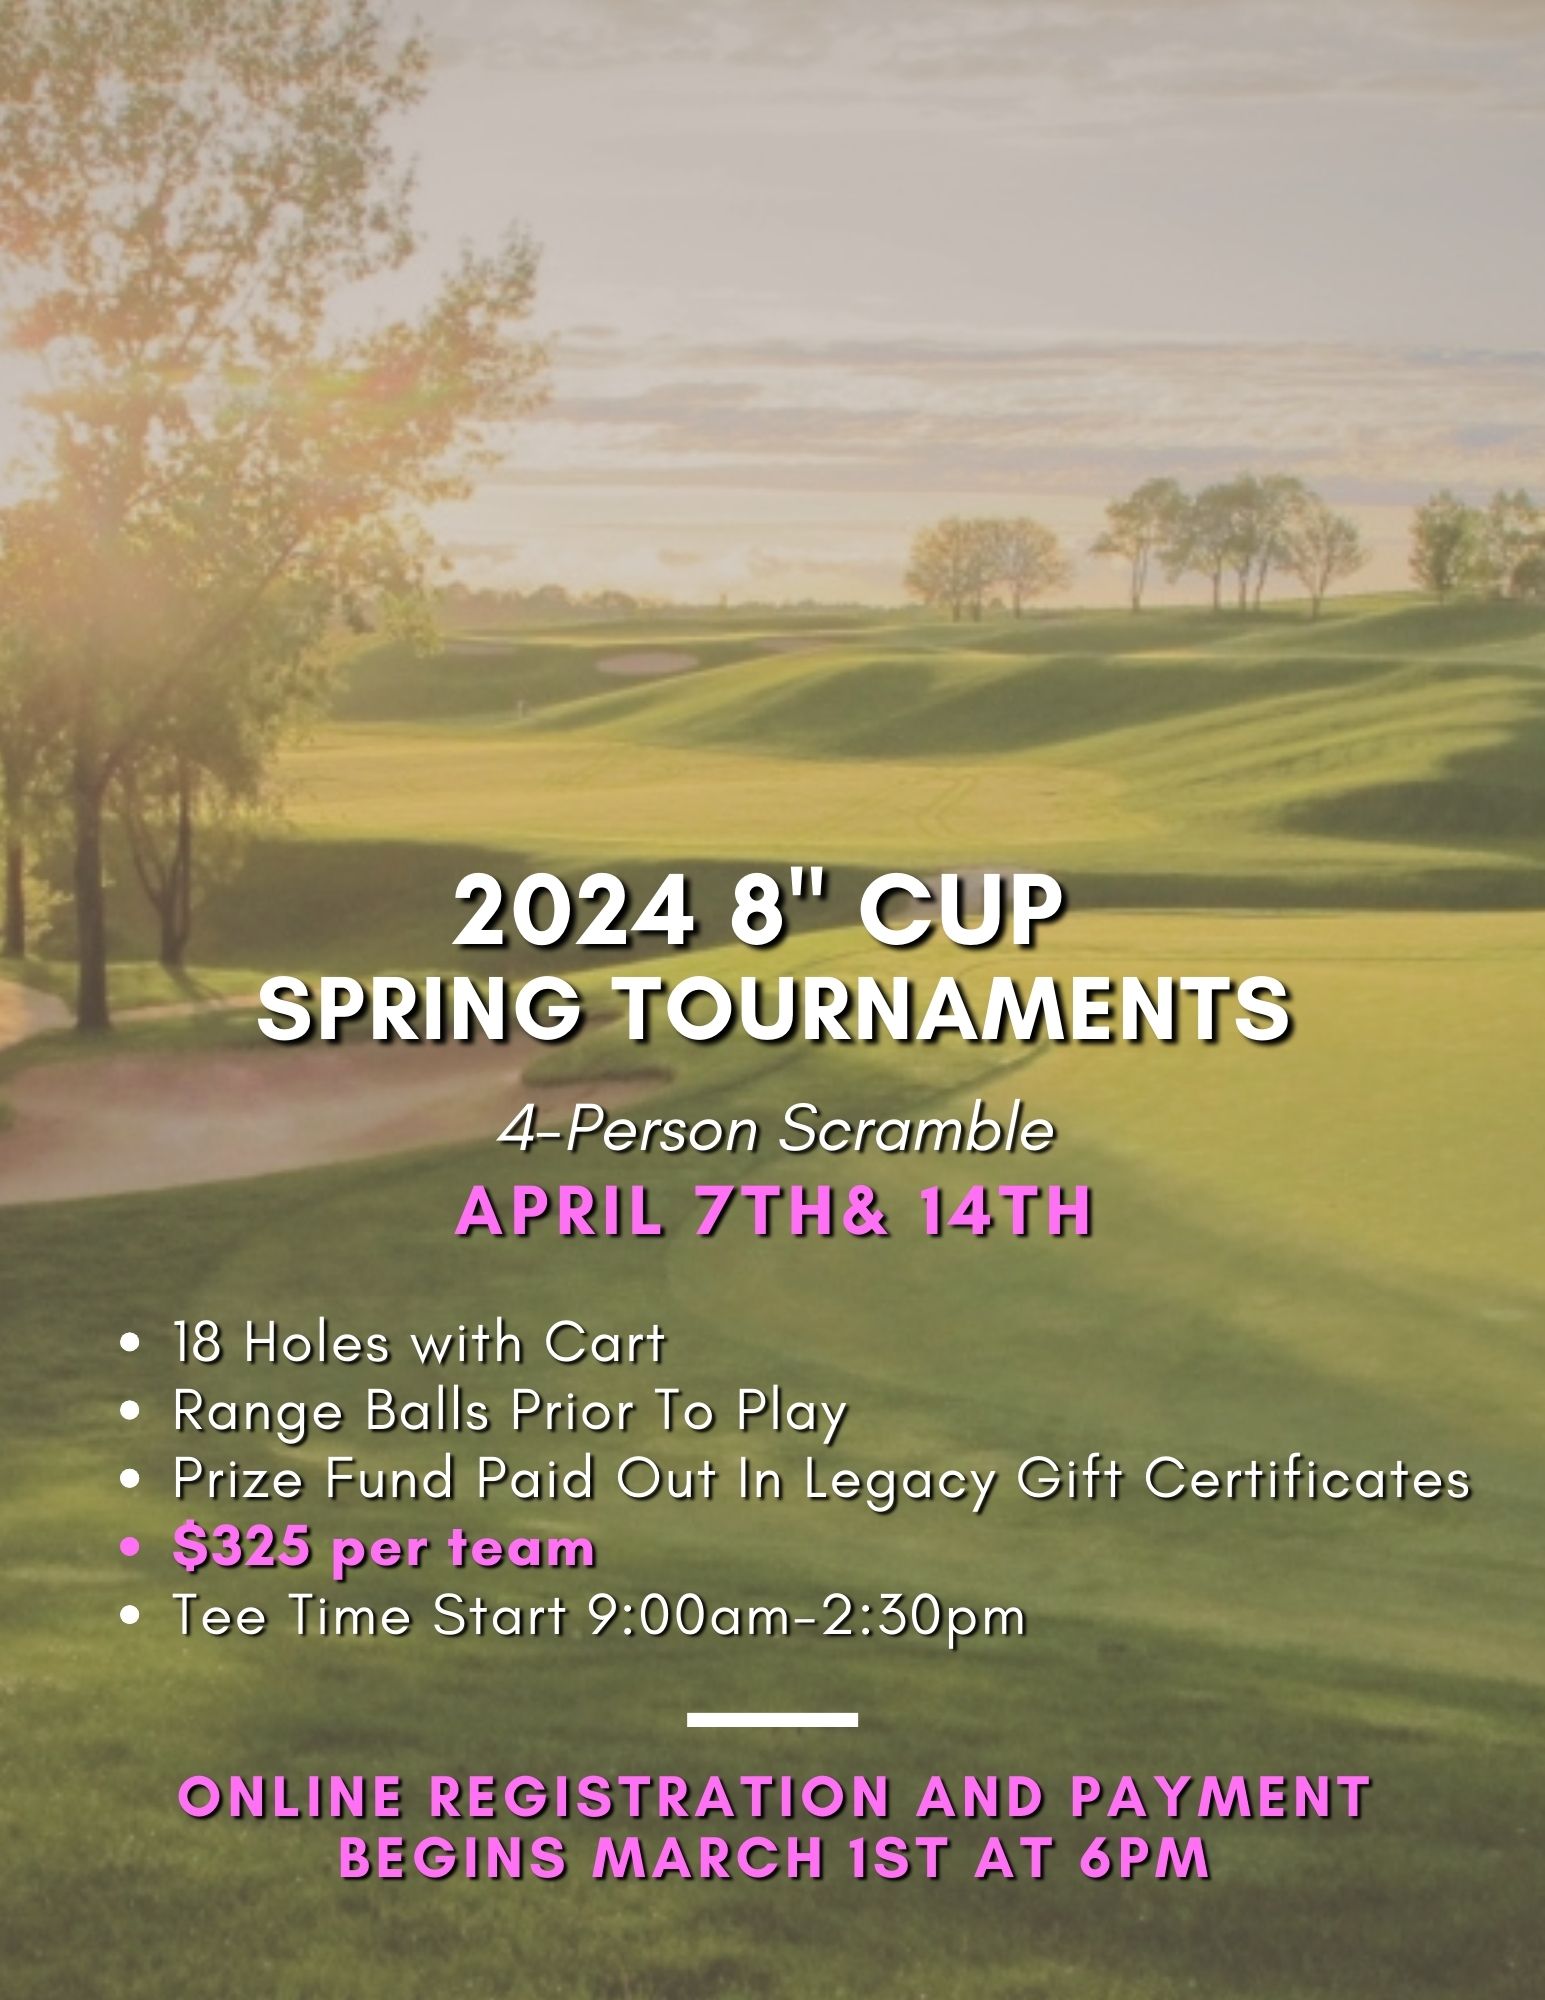 THE SPRING TOURNAMENT BEGINS!!!